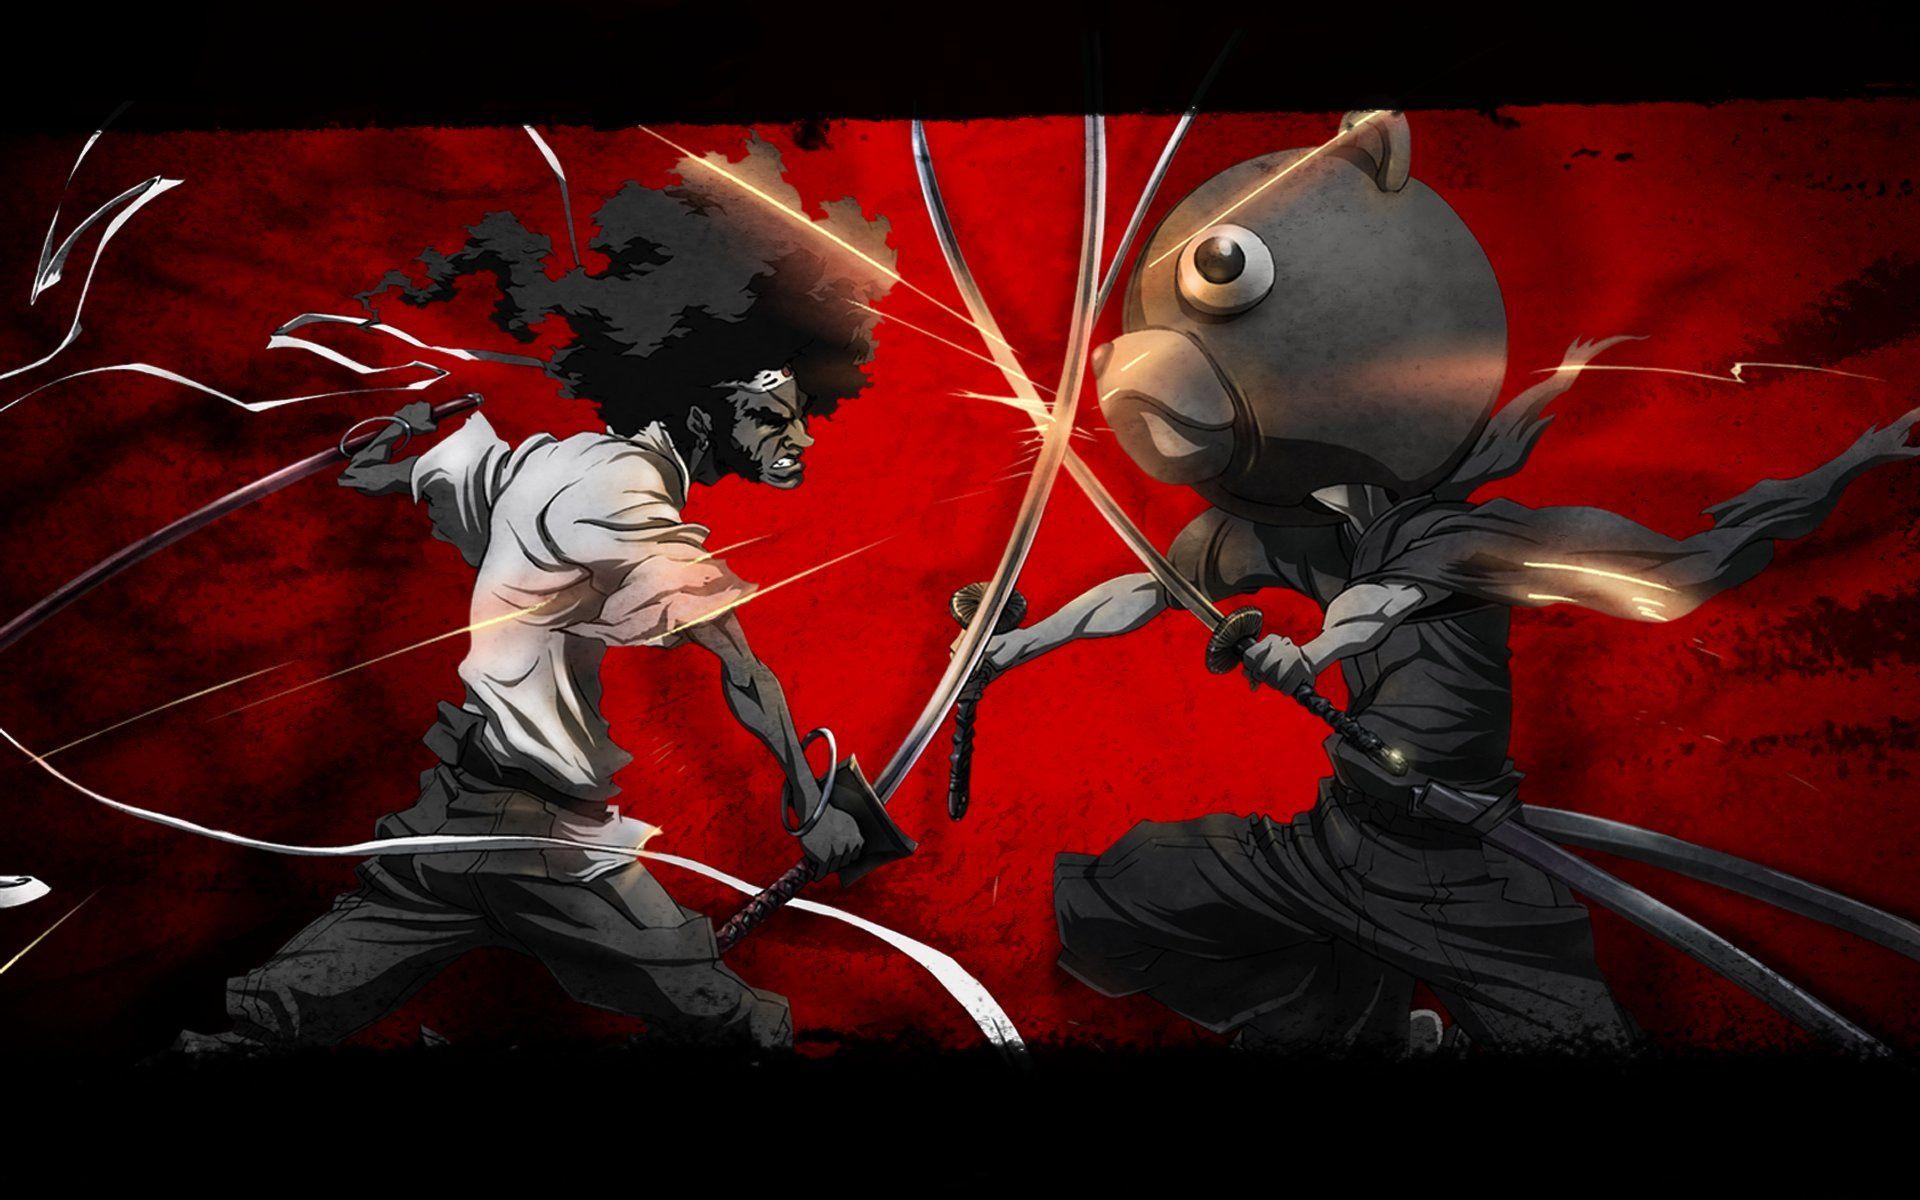 Epic Anime Fighting Wallpaper High Quality Resolution #epic #anime